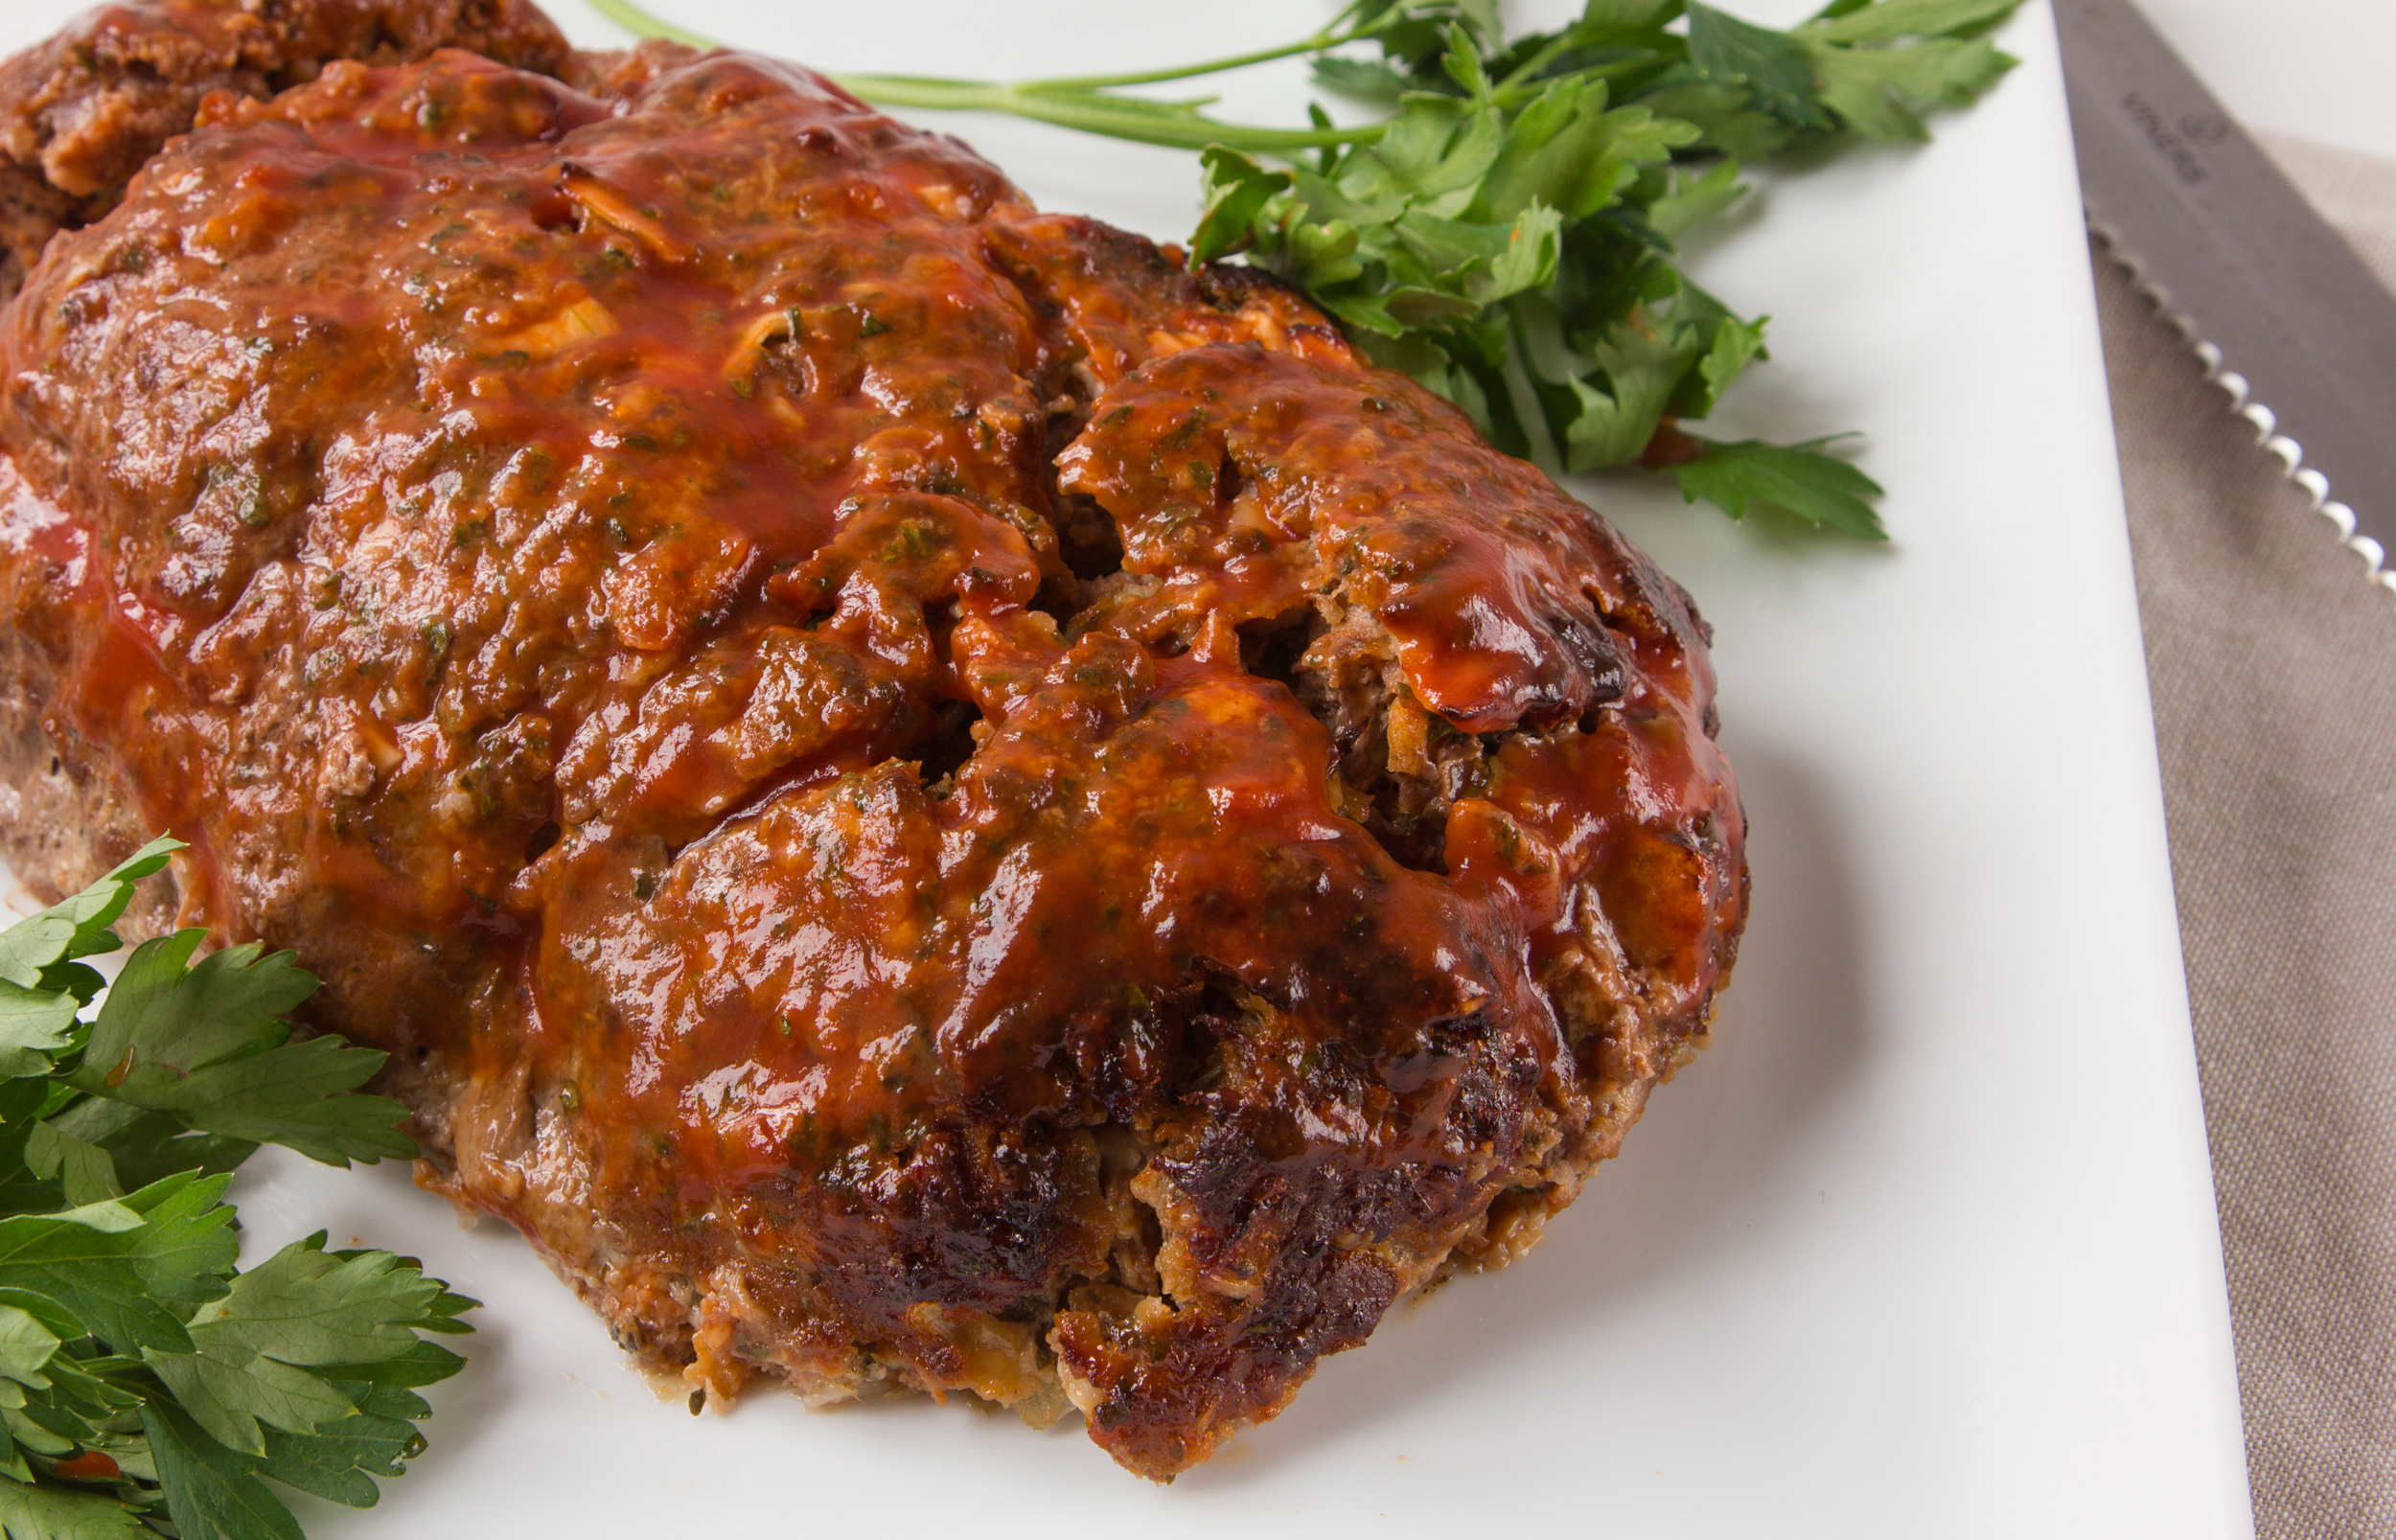 LAURIE'S LOW-CARB MEATLOAF